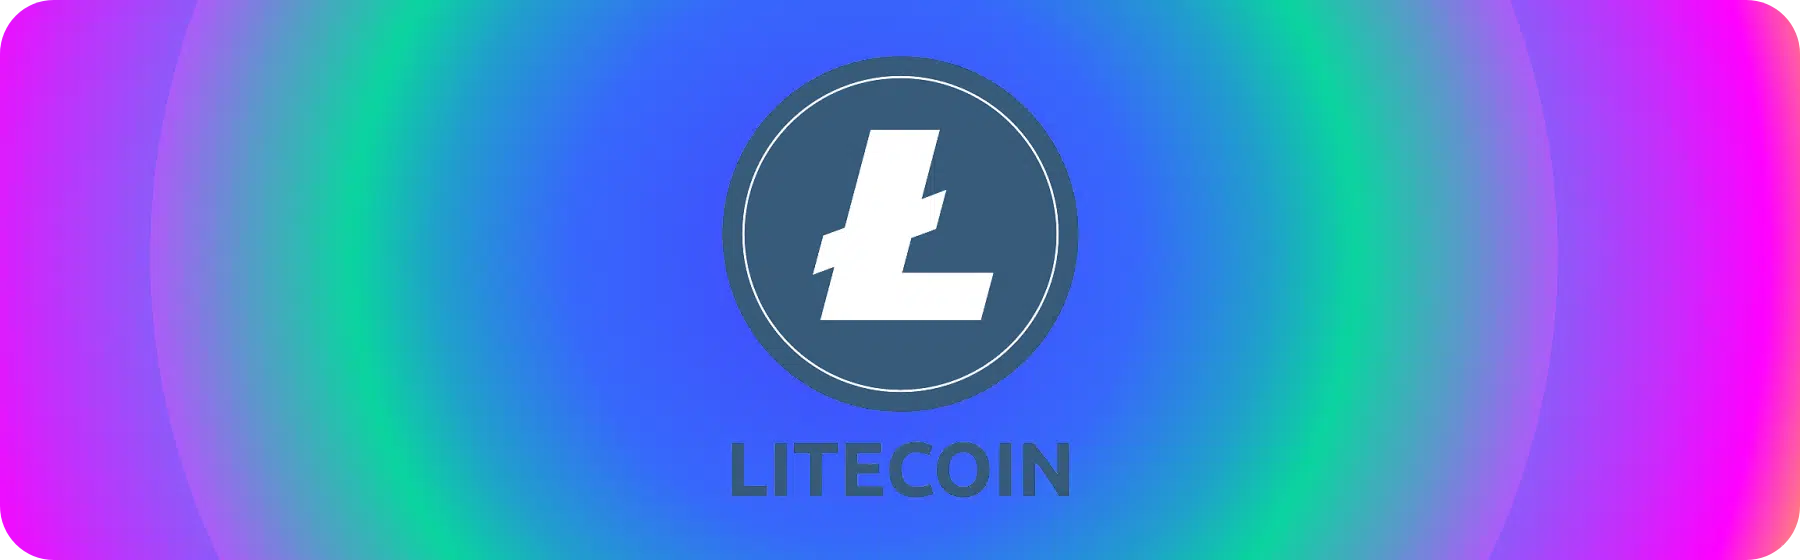 logo for litecoin payment